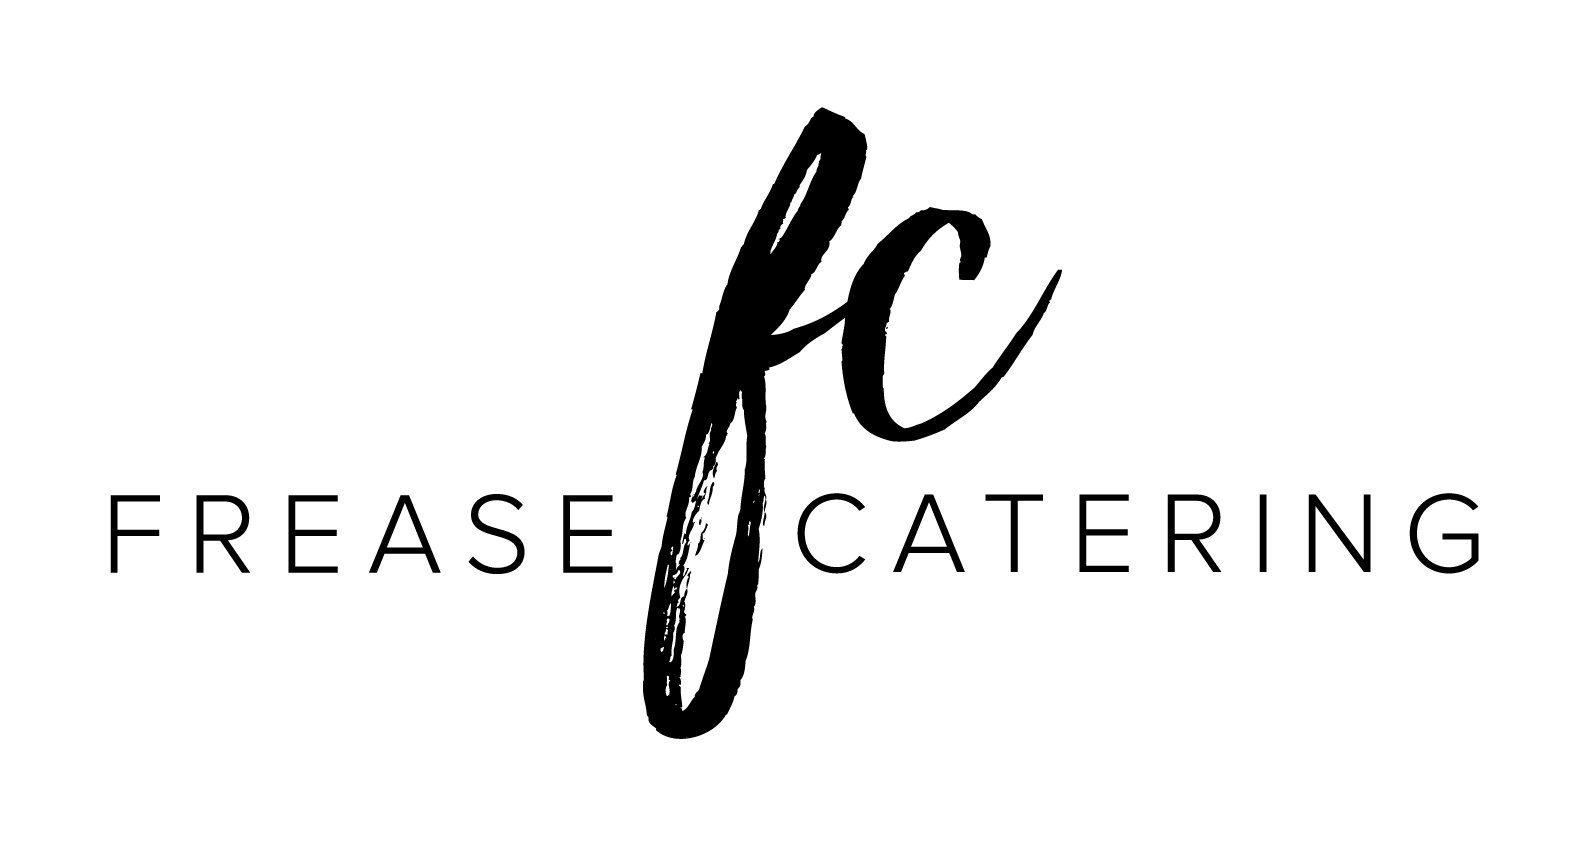 Frease Catering